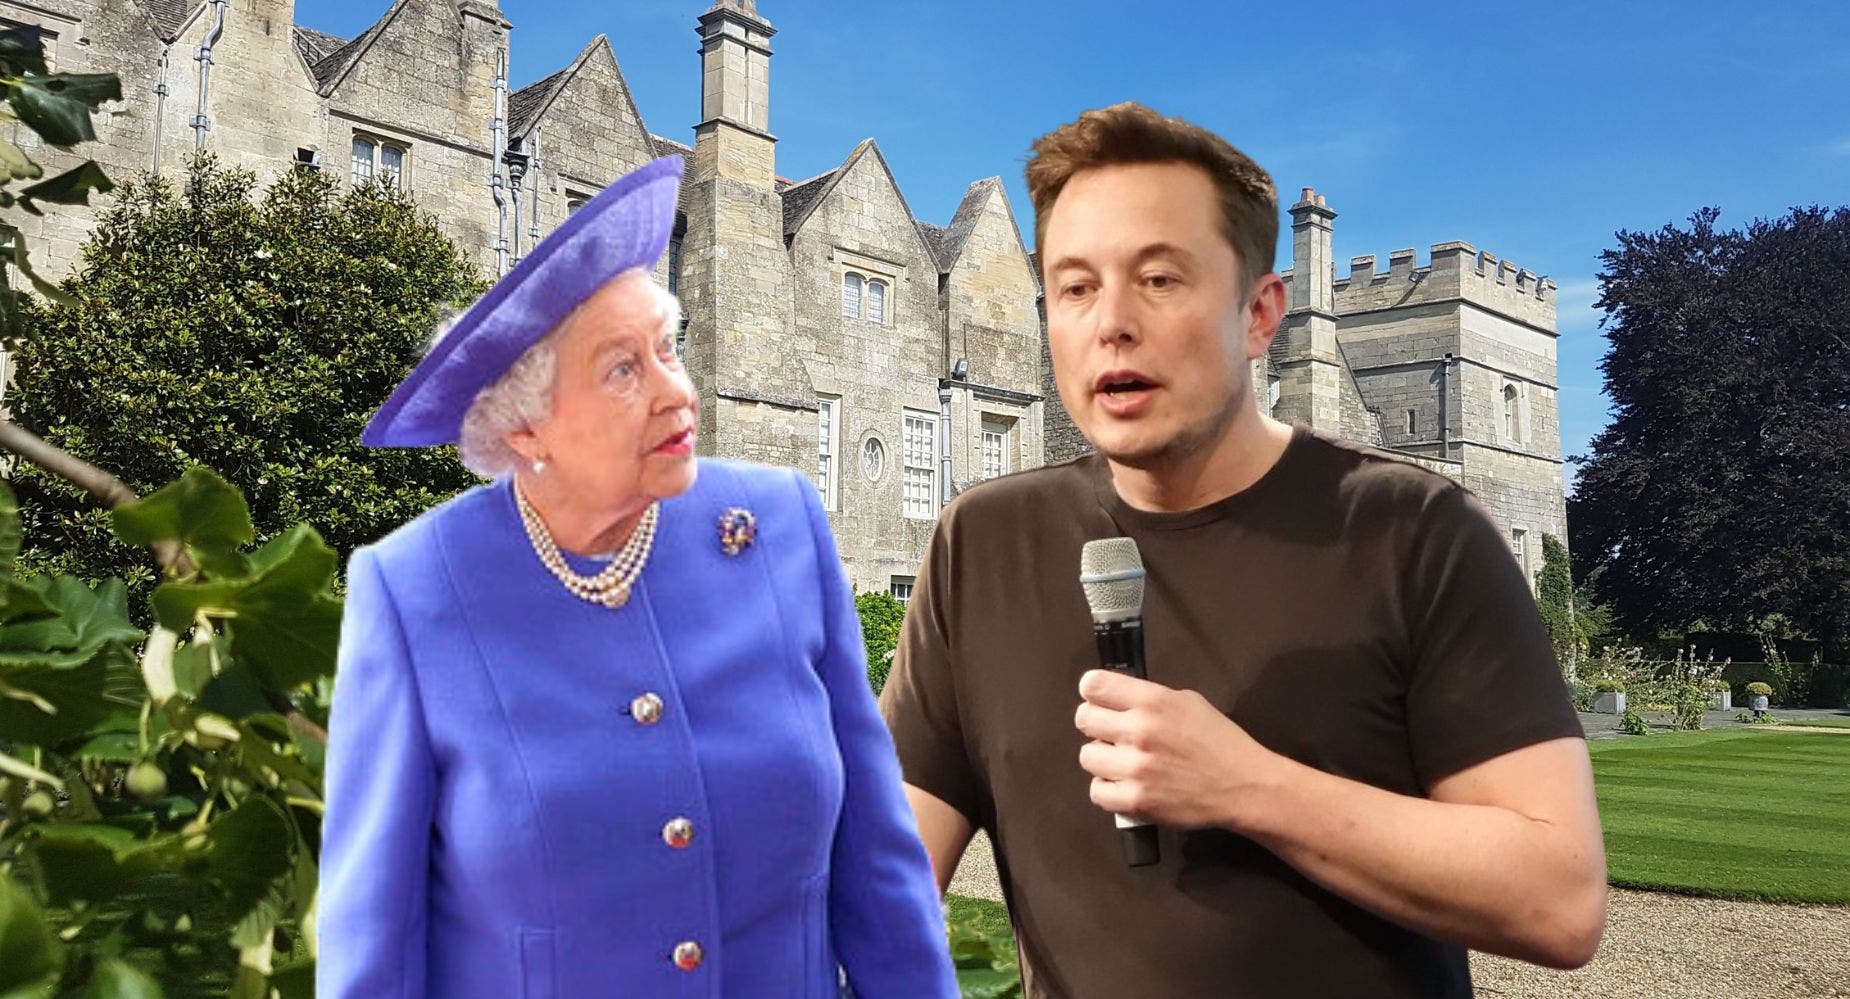 How Elon Musk Once Compared Queen Elizabeth II With 'Teletubbies,' And The Backlash He Faced